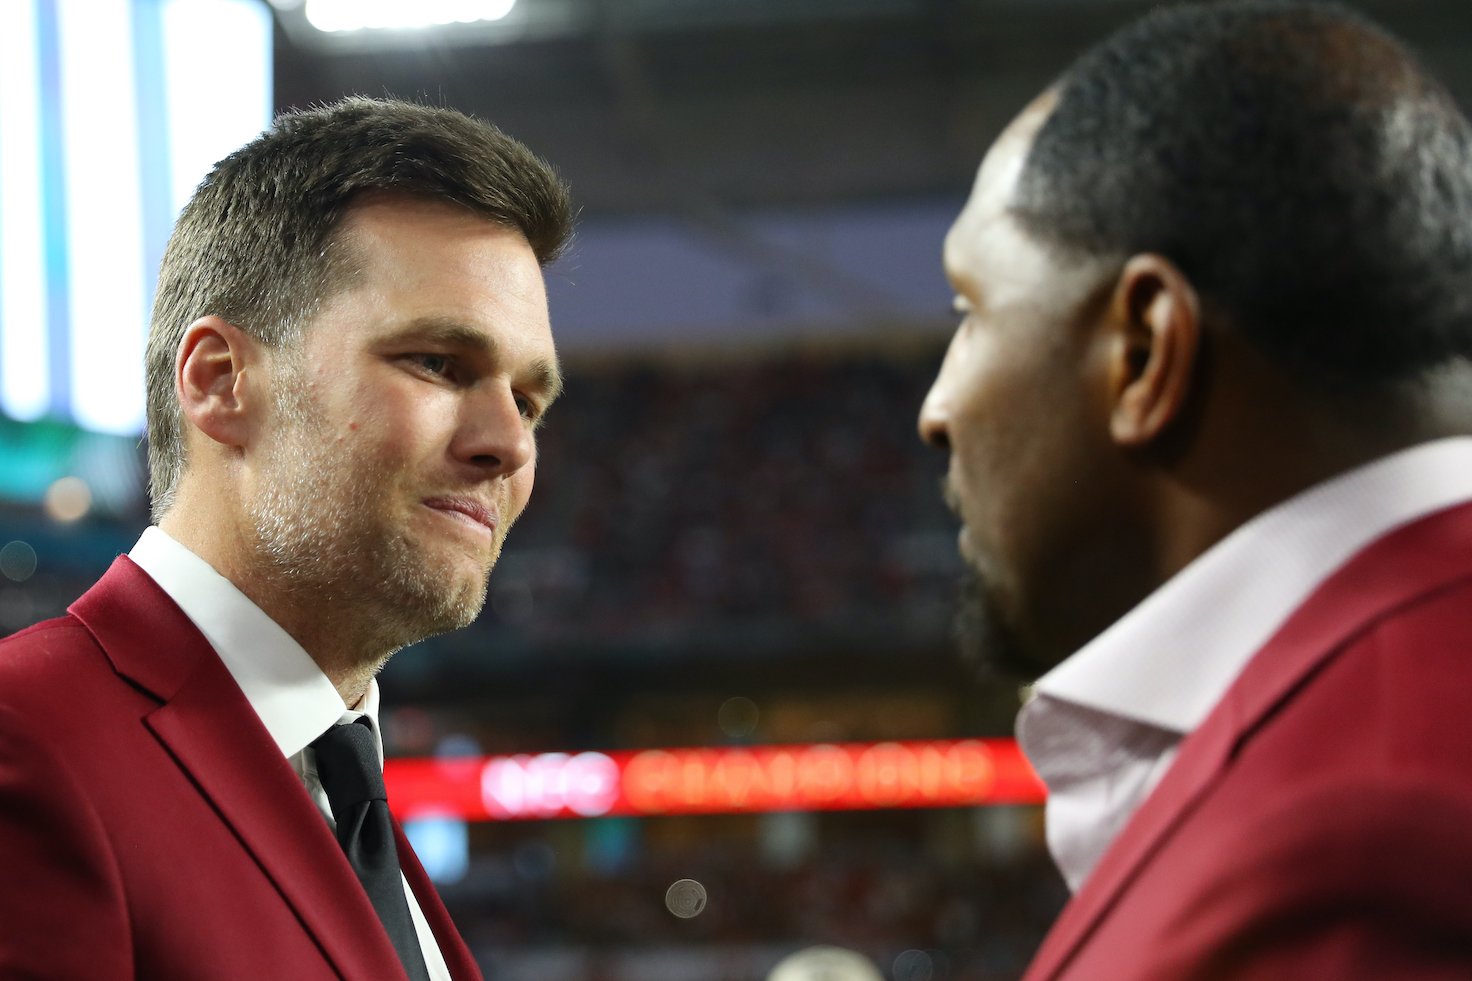 Brady of the Tampa Bay Bucs talks with NFL Hall of Famer Ray Lewis of the Baltimore Ravens prior to Super Bowl LIV between the San Francisco 49ers and the Kansas City Chiefs